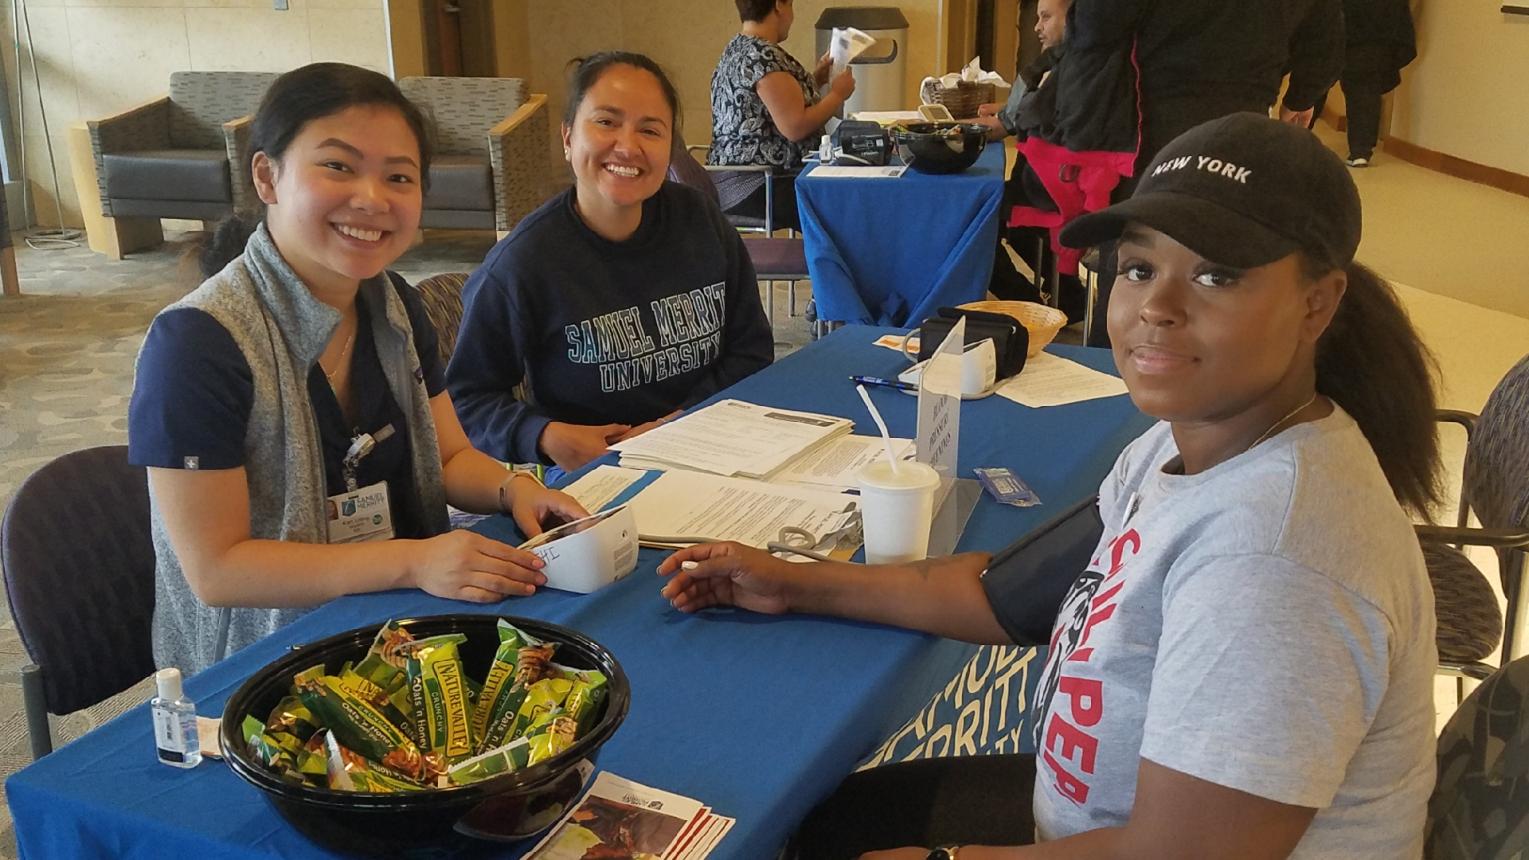 SMU students provide blood pressure screenings during World Diabetes Day